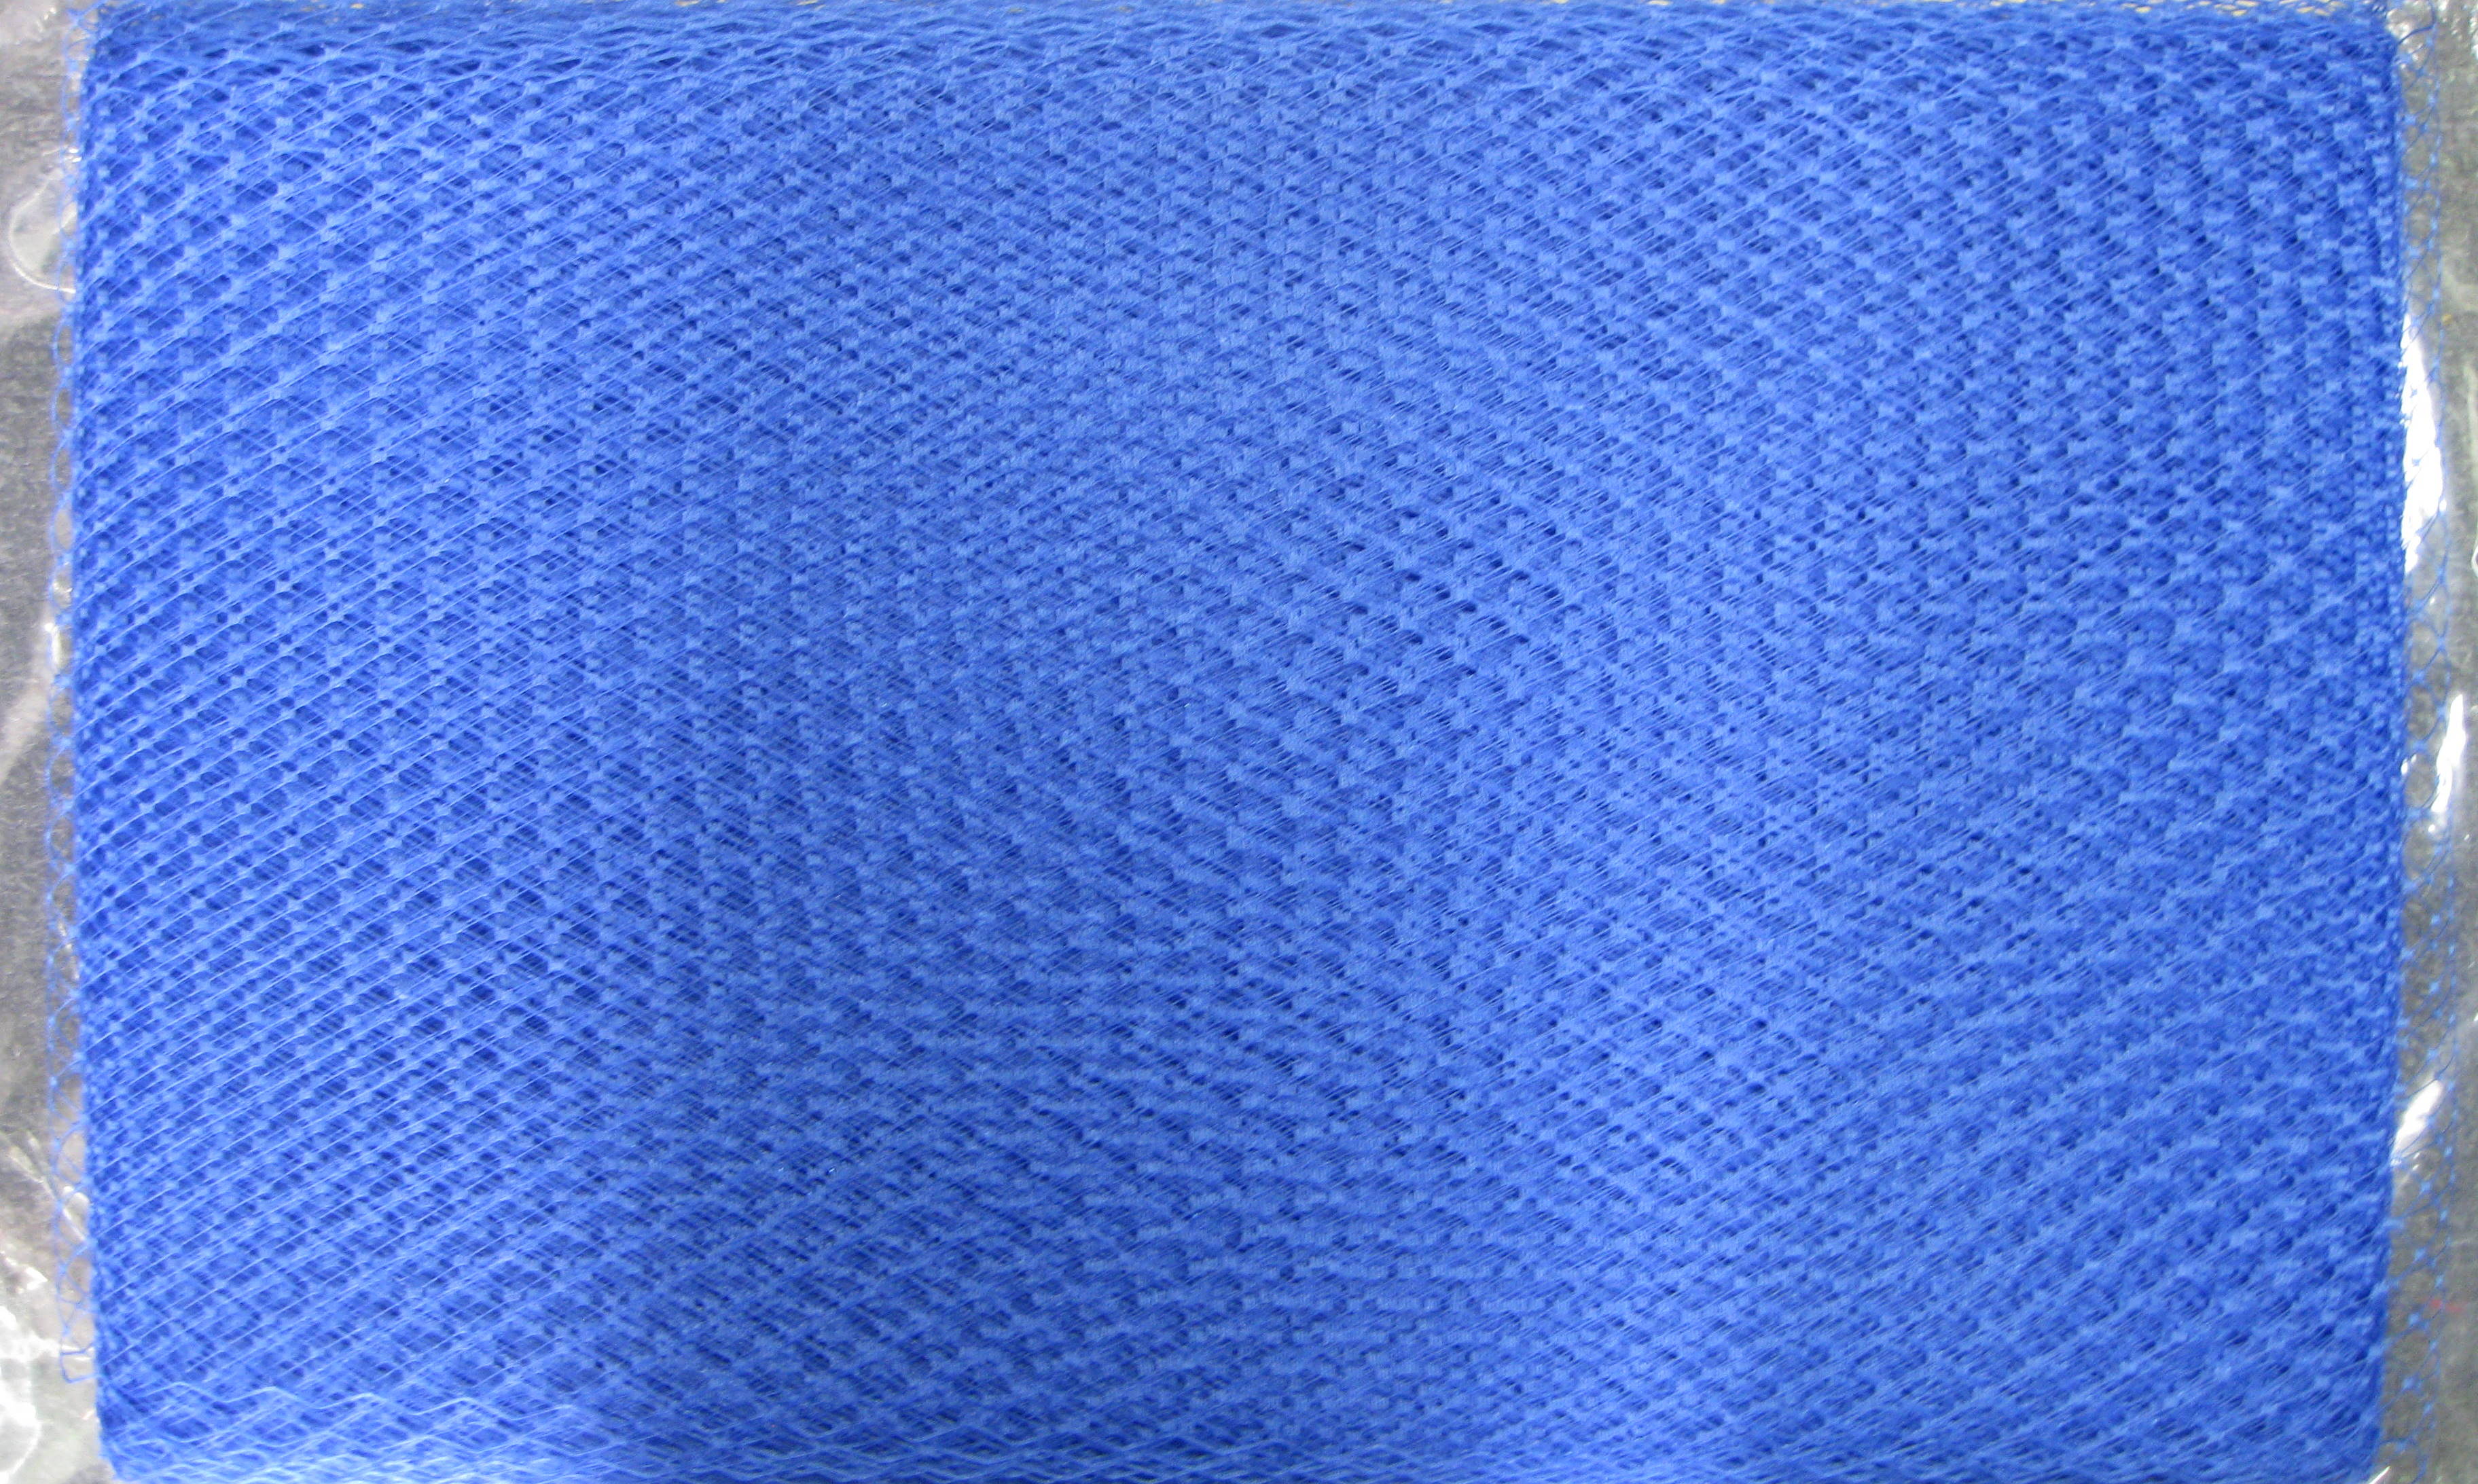 FRENCH NETTING TULLE BLUE